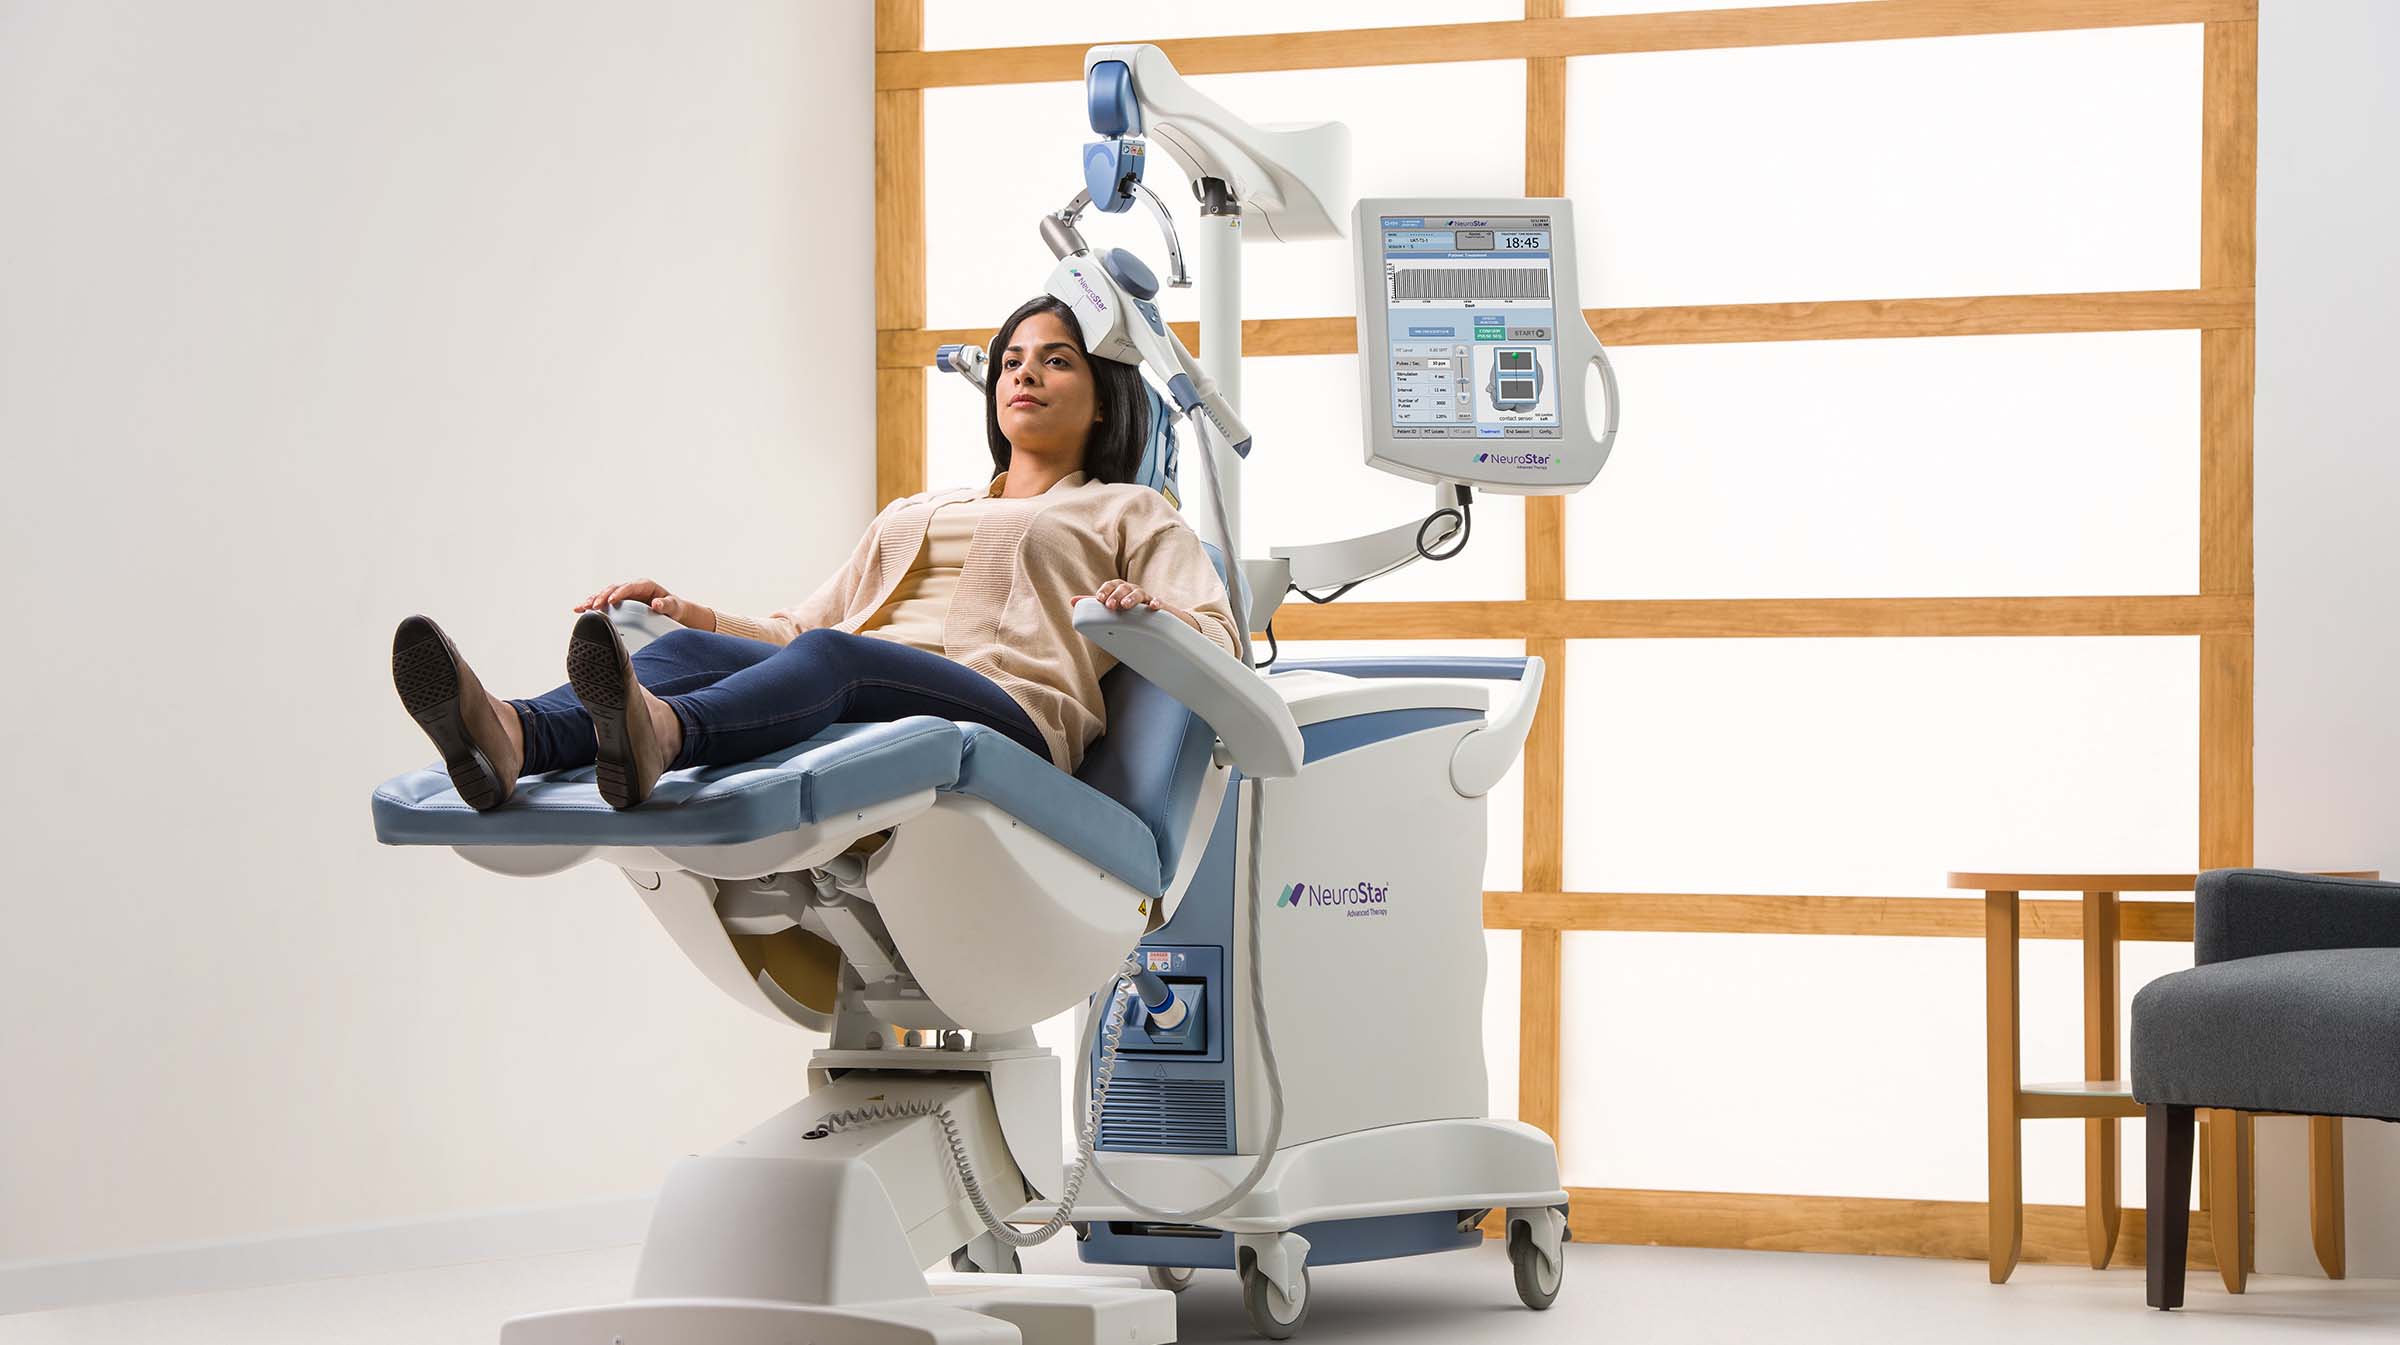 A woman sitting in an operating room chair.